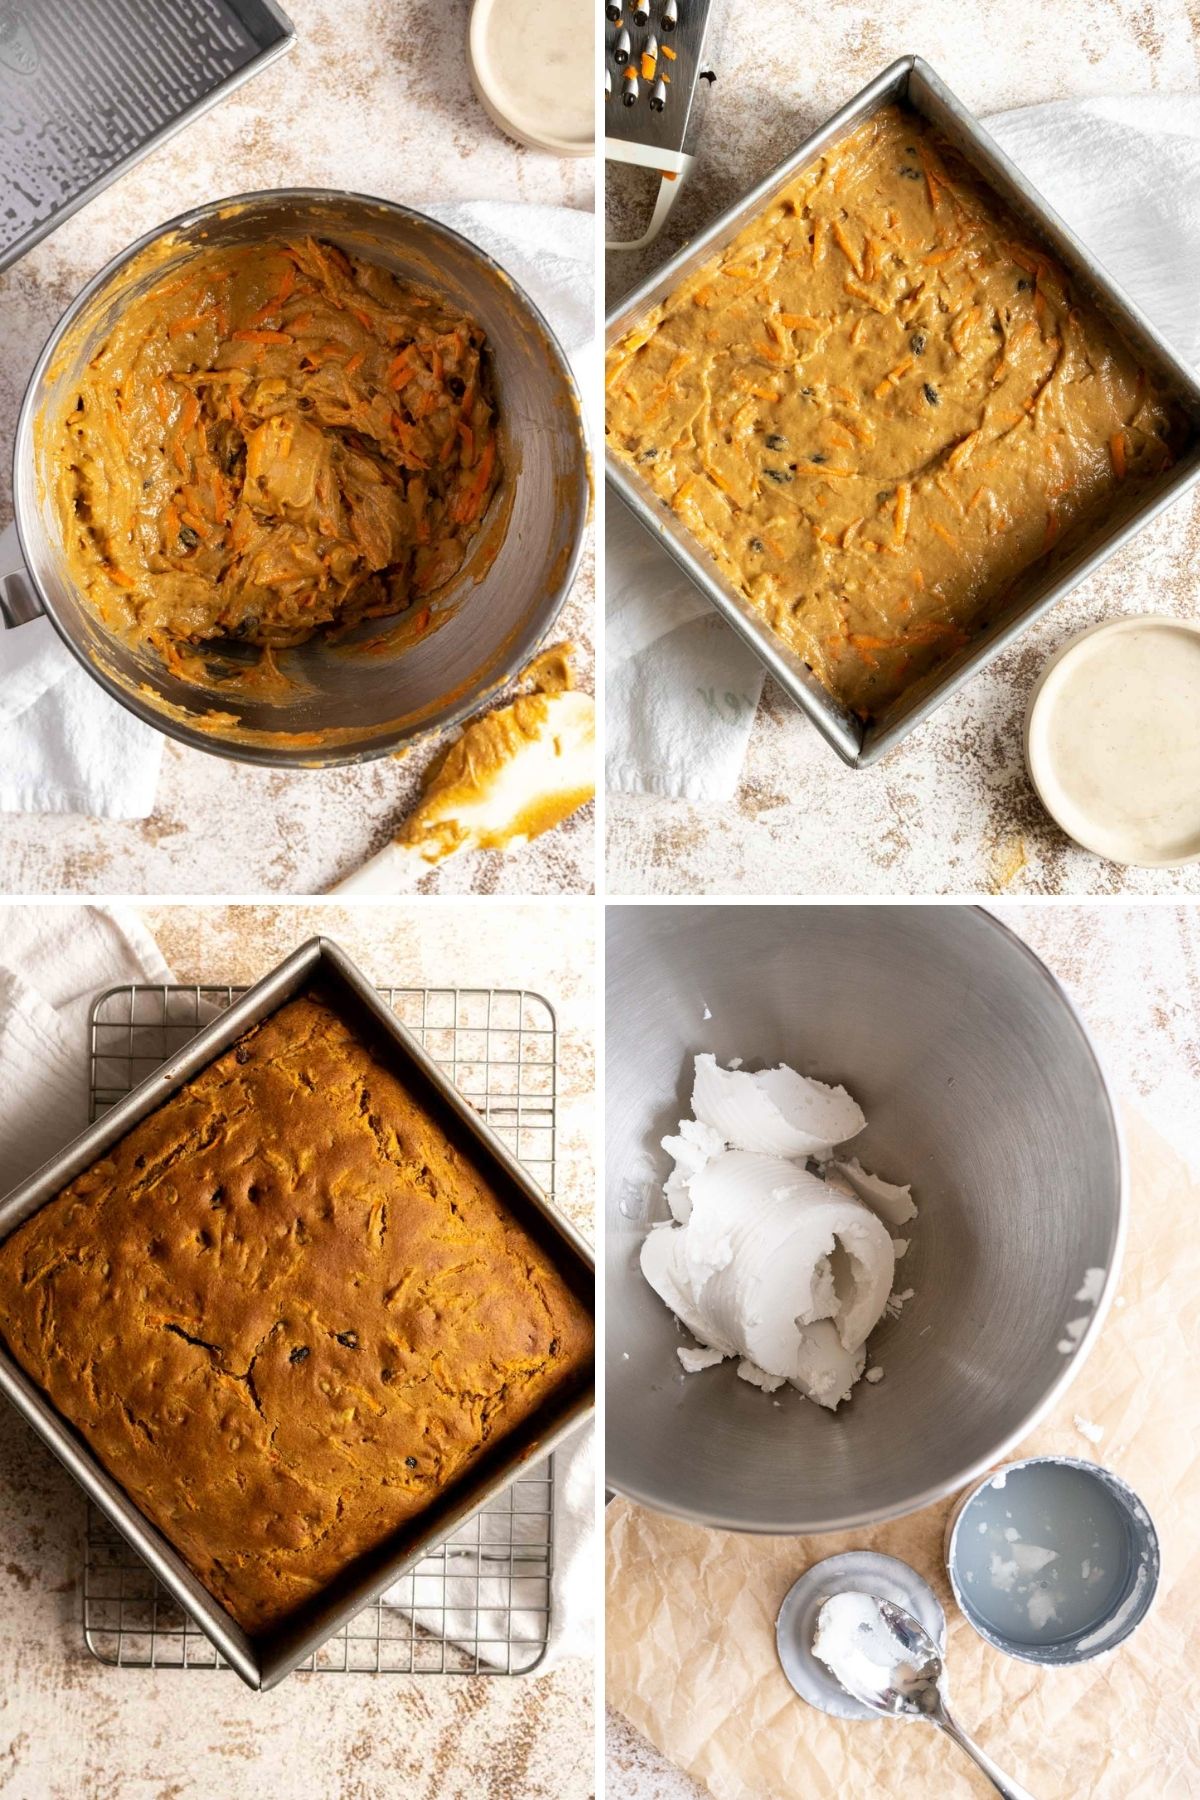 Mixing carrots and walnuts into cake batter. Baked cake on a wire rack.